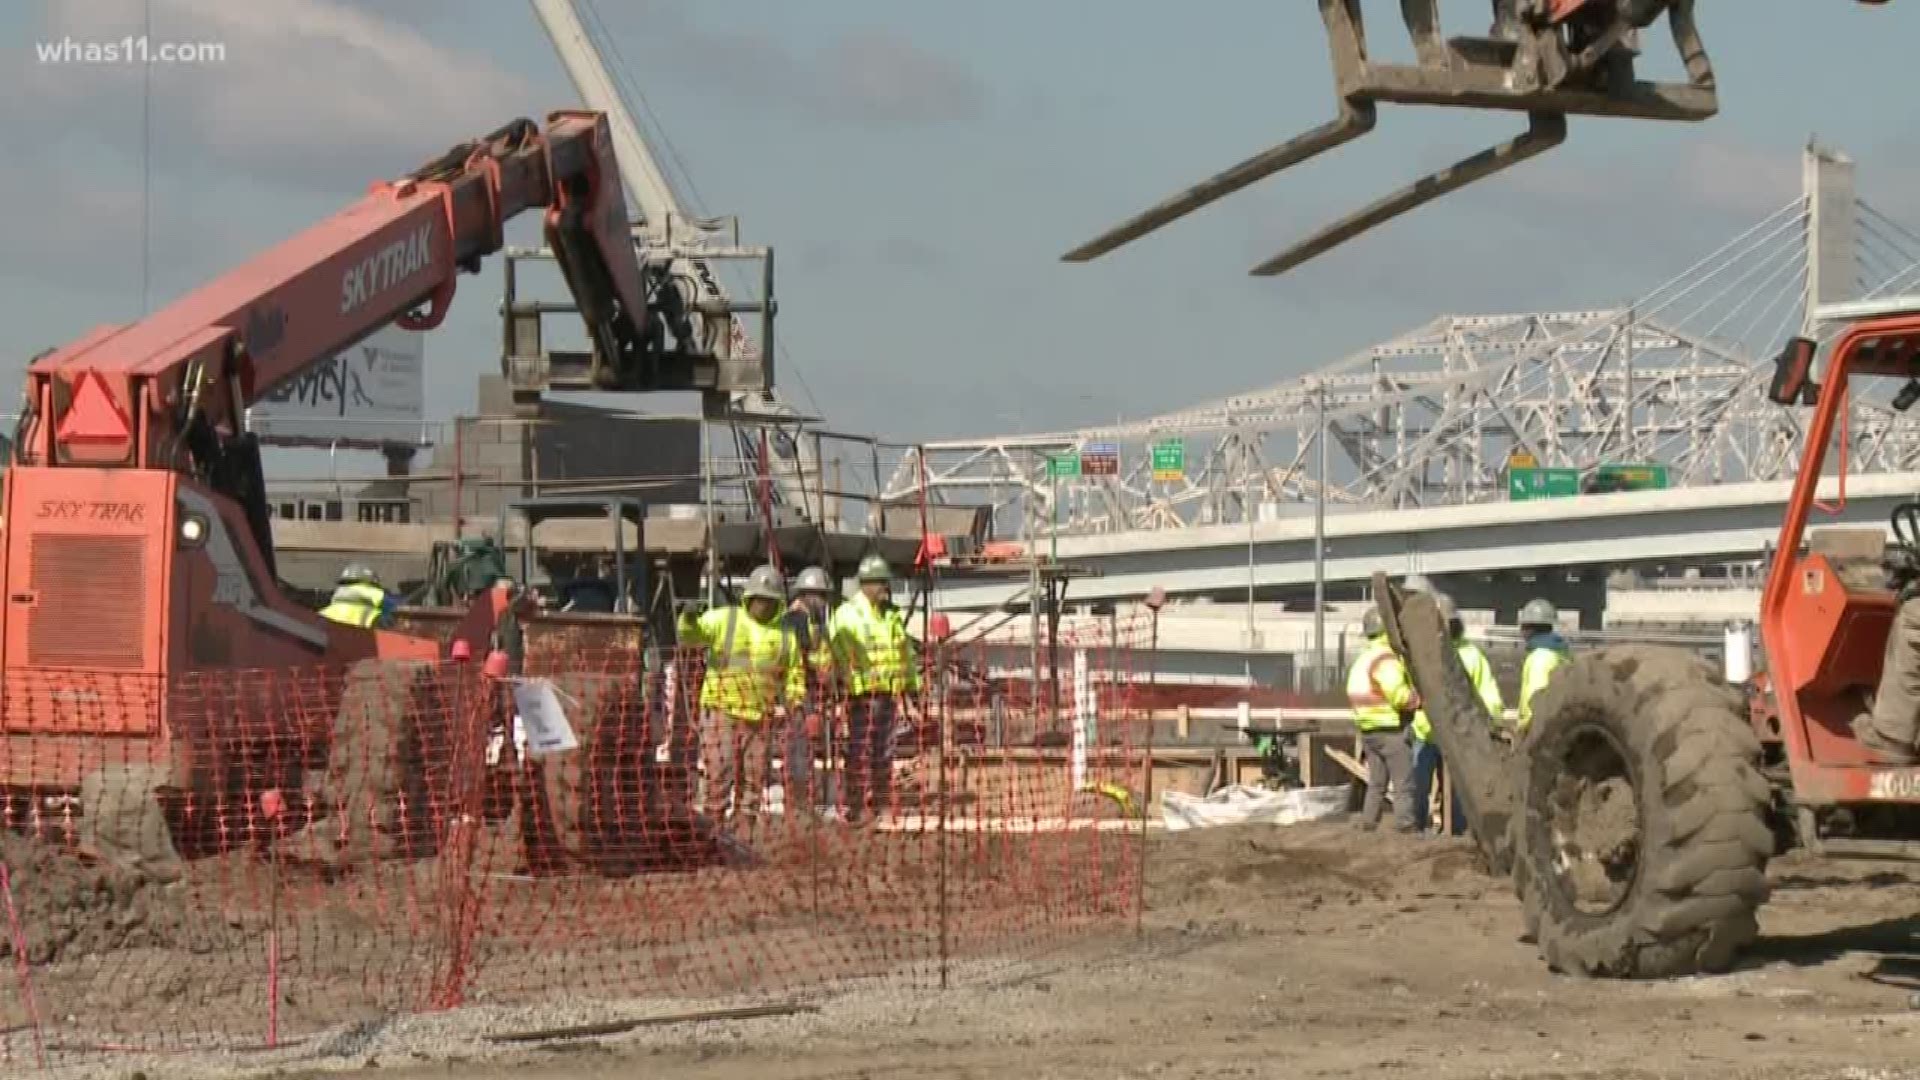 Construction crews said the rain presented a challenge, but only two days were stopped because of weather. LouCity's first home game of the season will be tomorrow at Slugger Field.